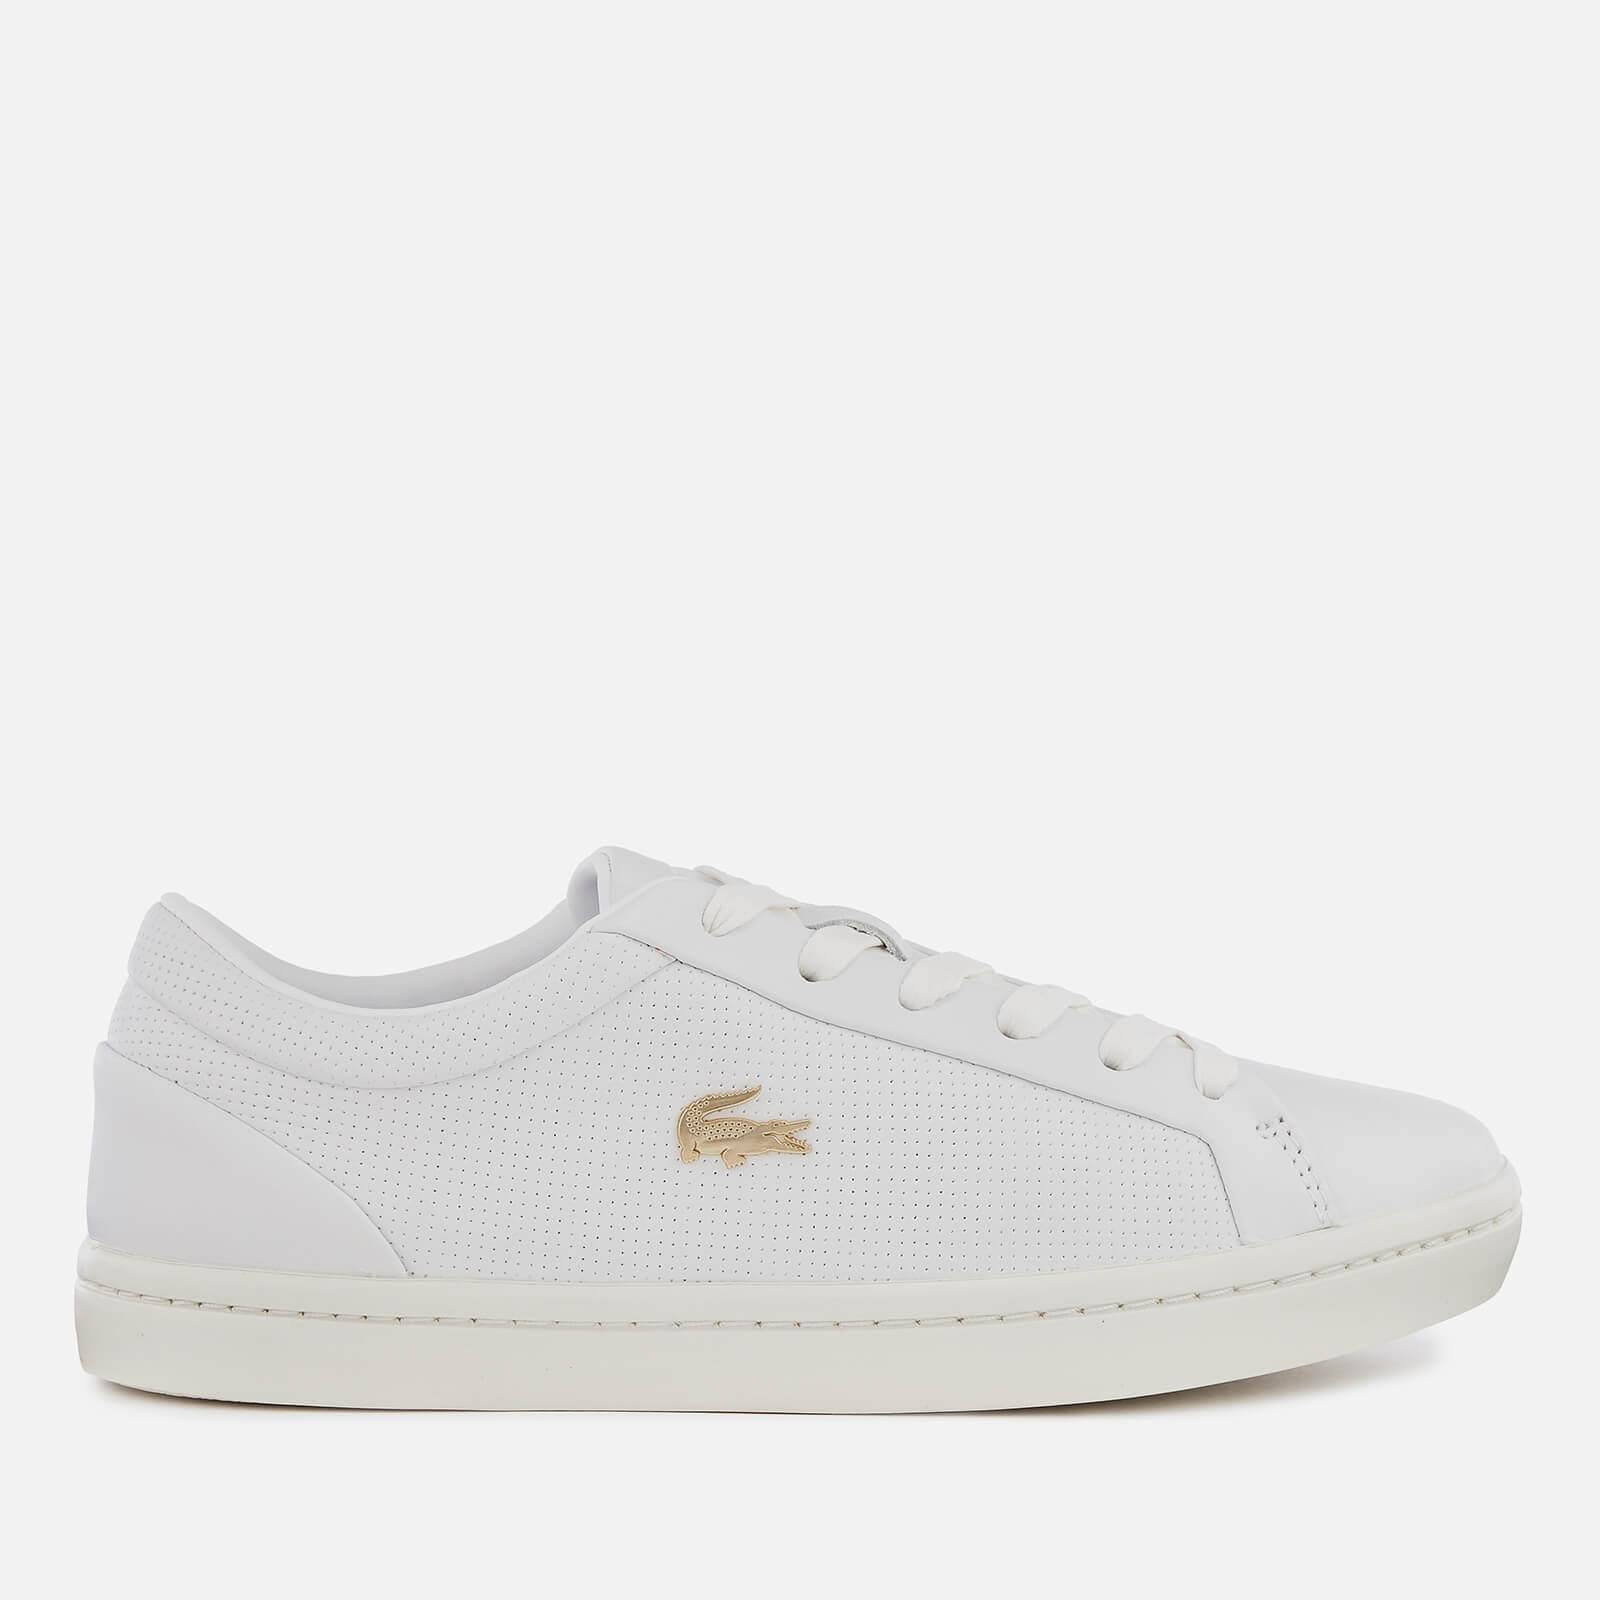 Lacoste Straightset 119 2 Leather 